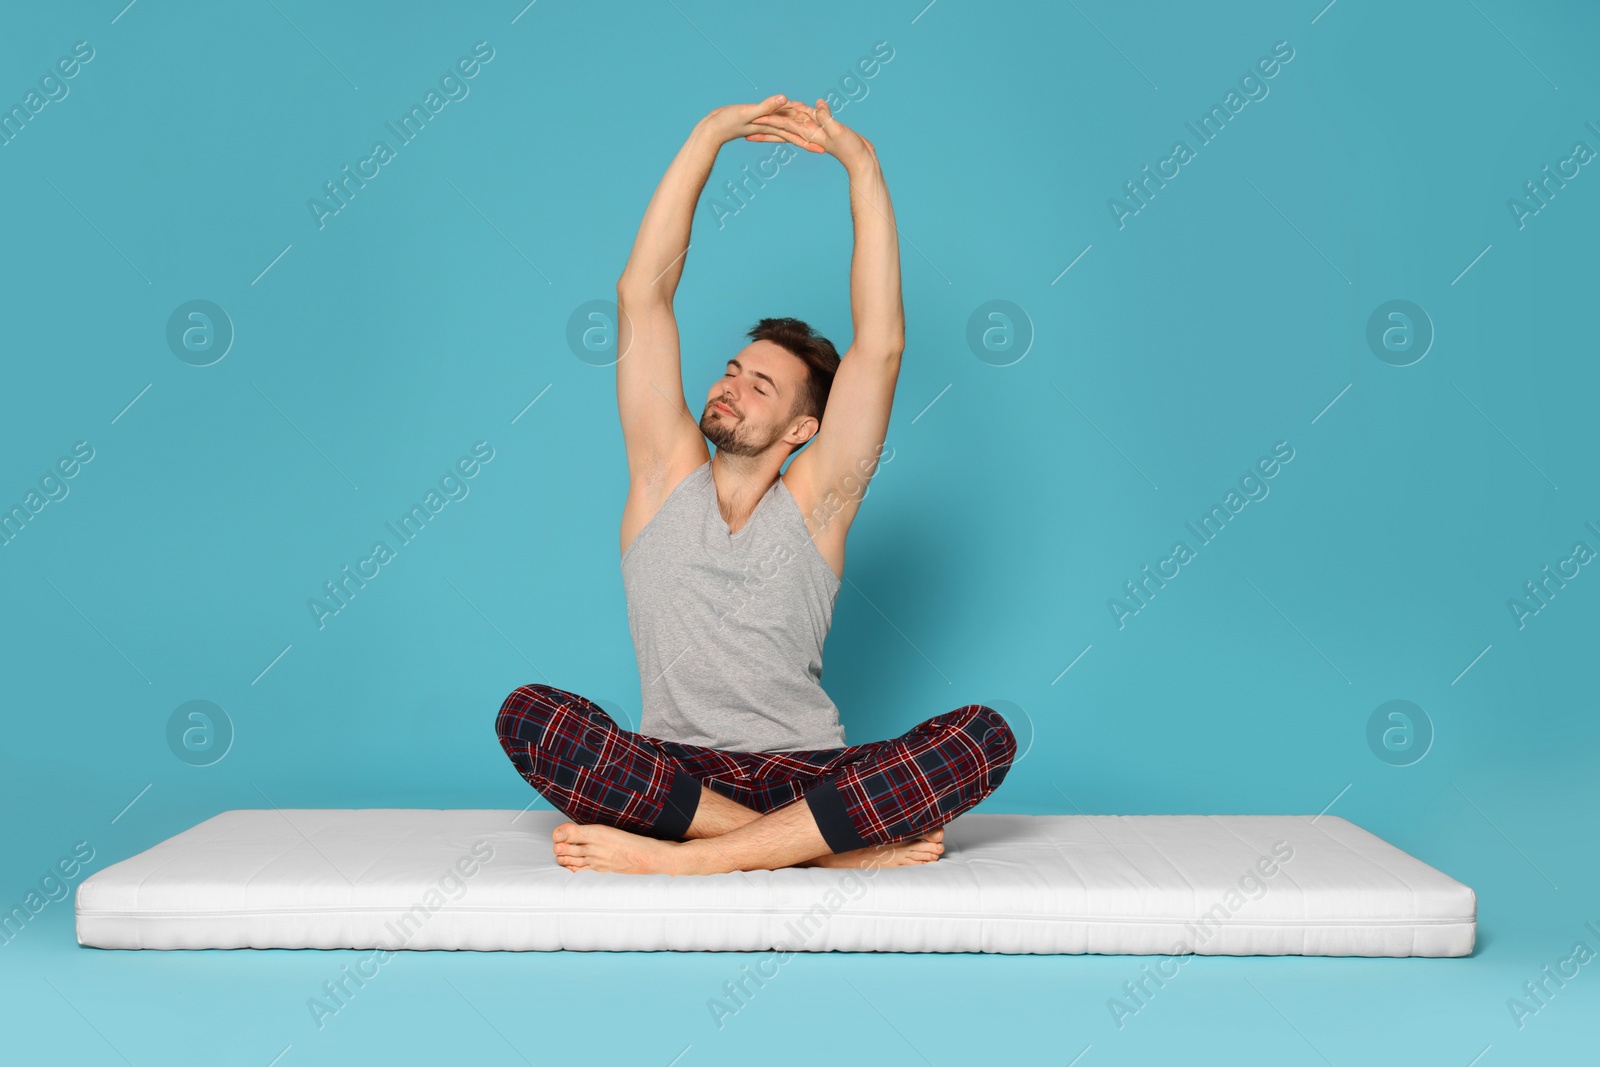 Photo of Man stretching on soft mattress against light blue background